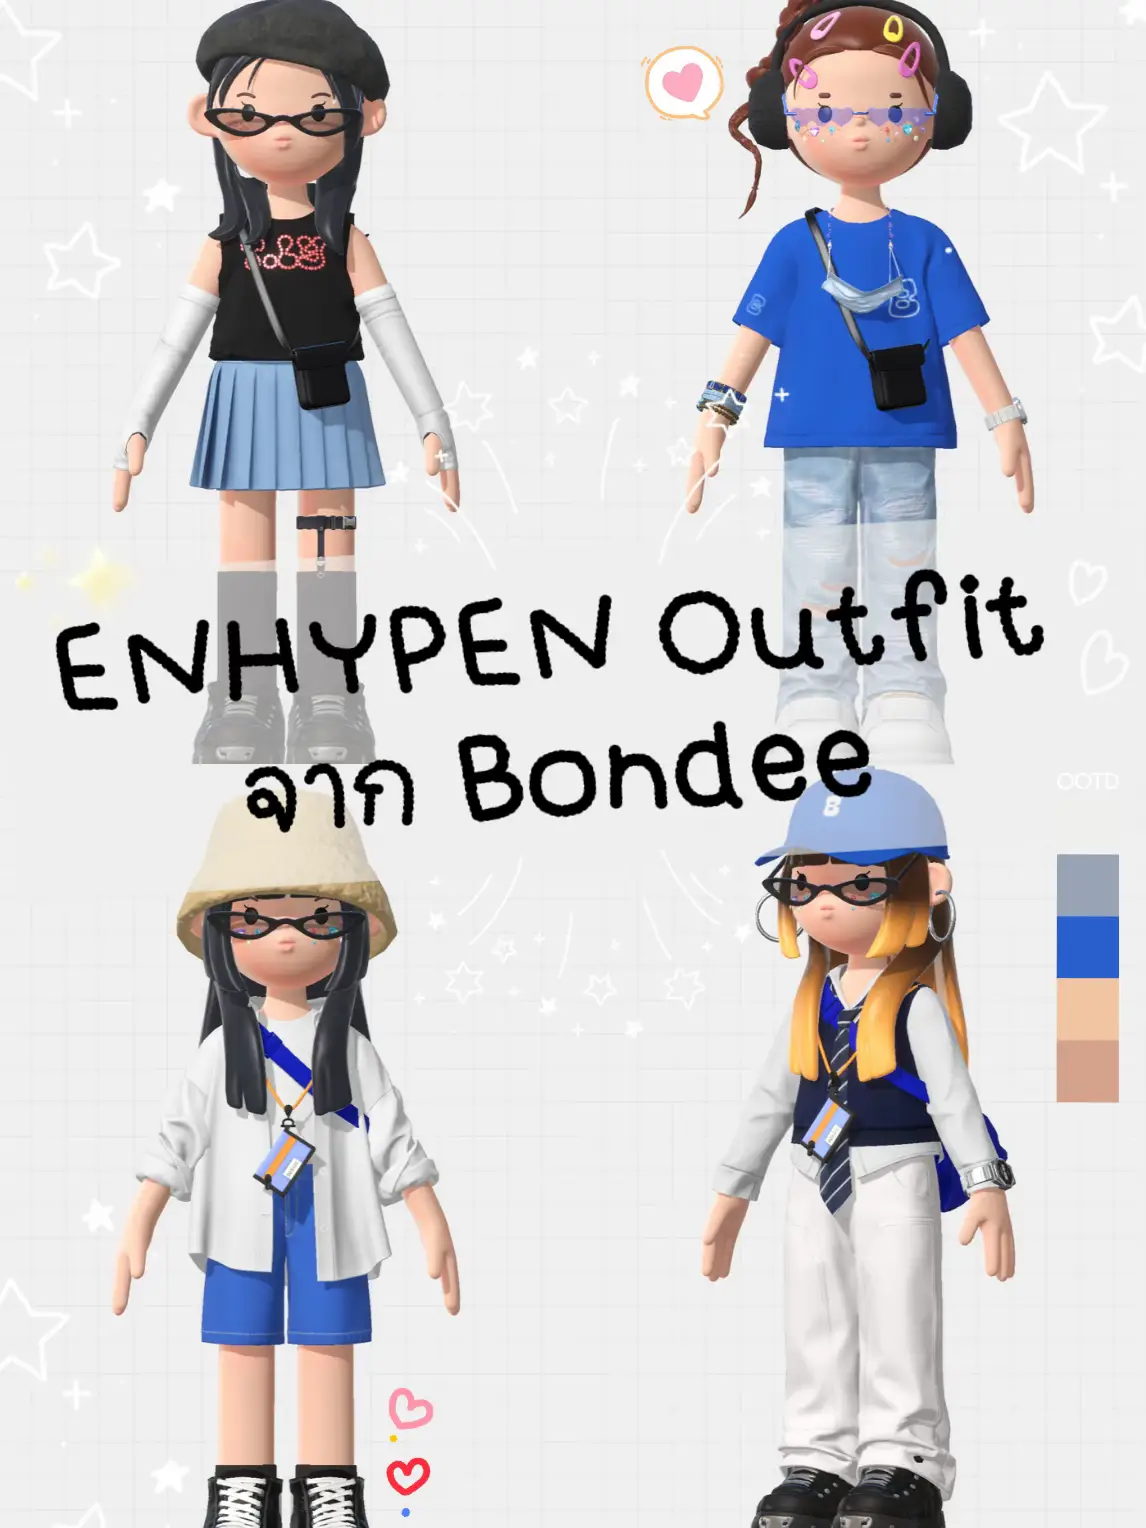 0 Robux Outfit Ideas 💅✨ 